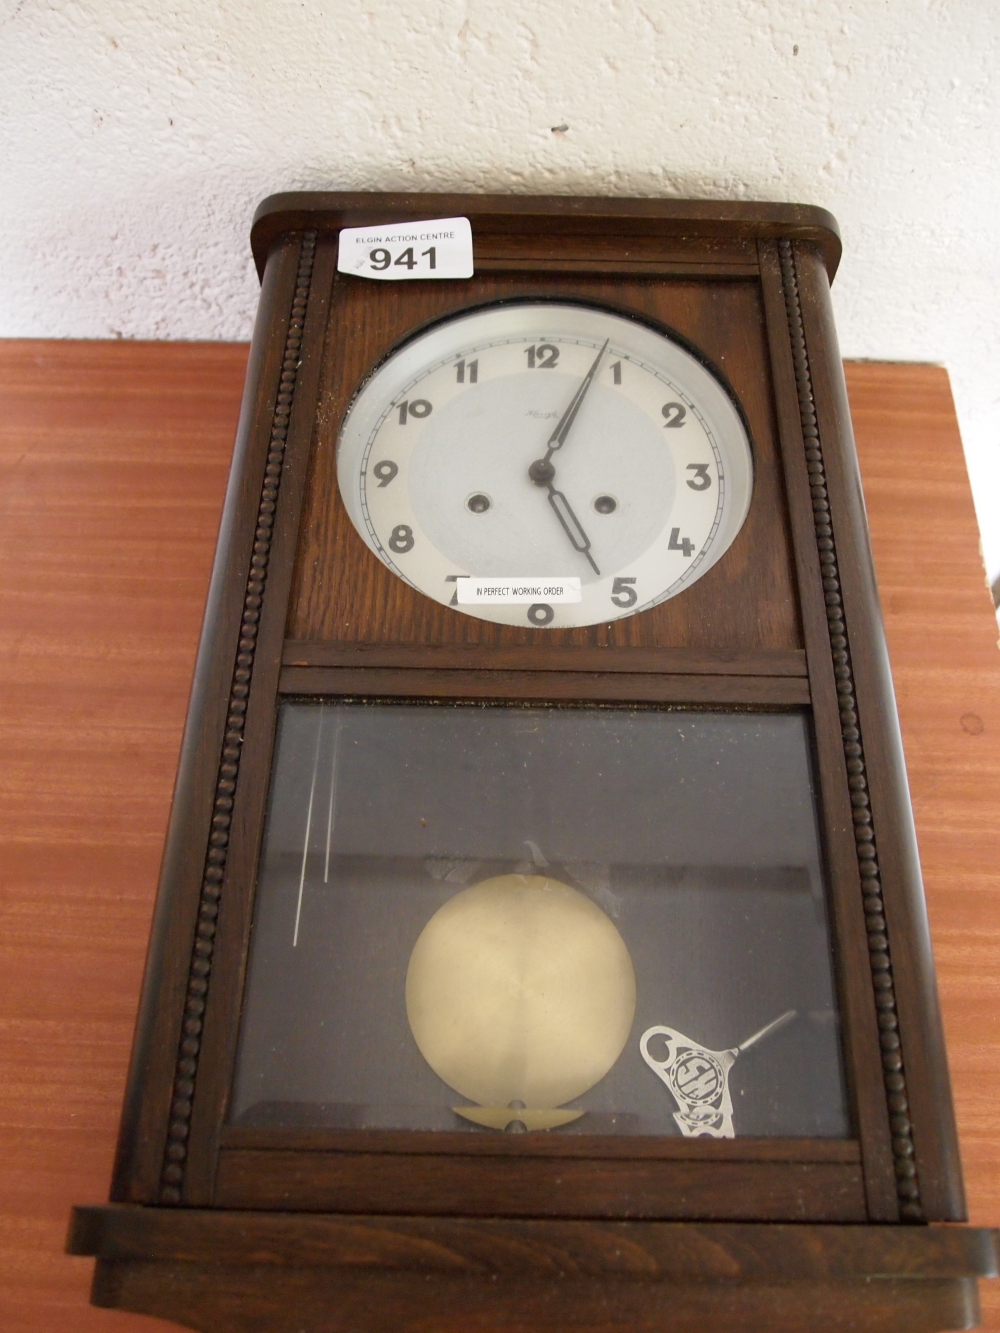 Sale Item:    WALL CLOCK   Vat Status:   No Vat   Buyers Premium:  This lot is subject to a Buyers